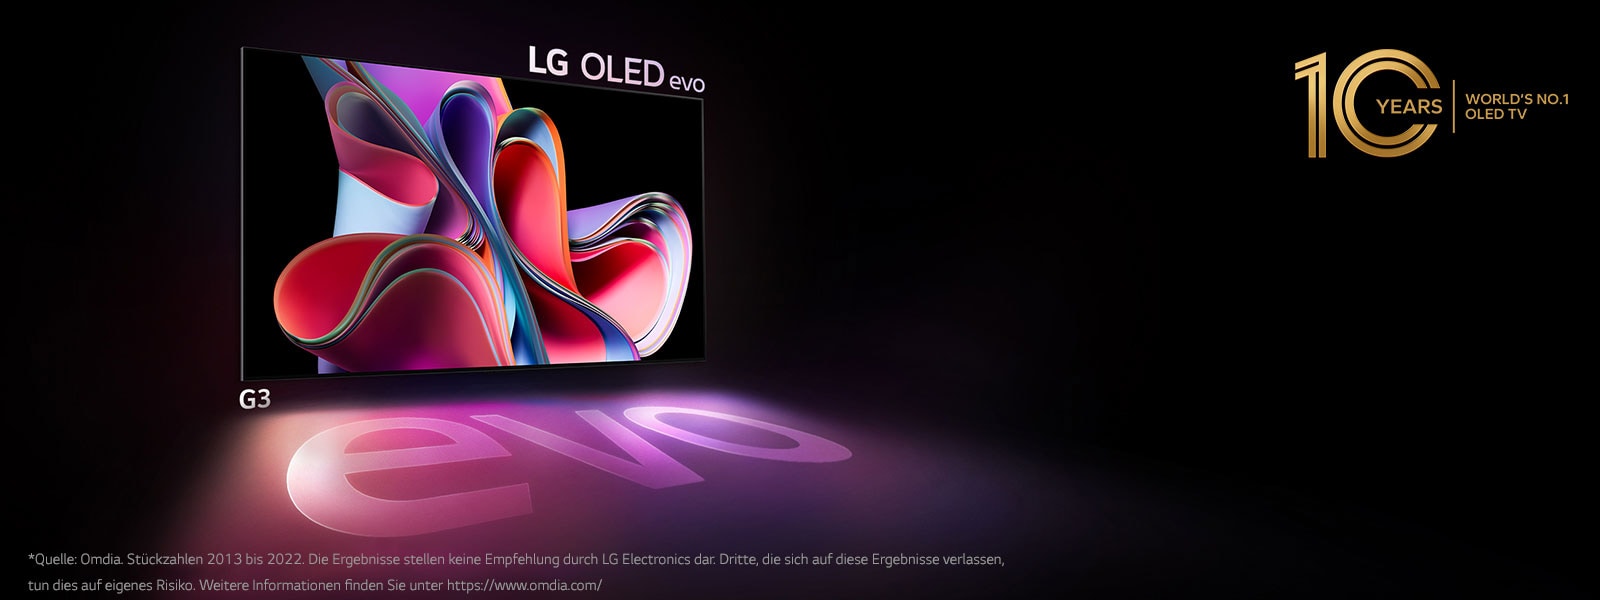 An image of LG OLED G3 against a black backdrop showing a bright pink and purple abstract artwork. The display casts a colorful shadow that features the word "evo."